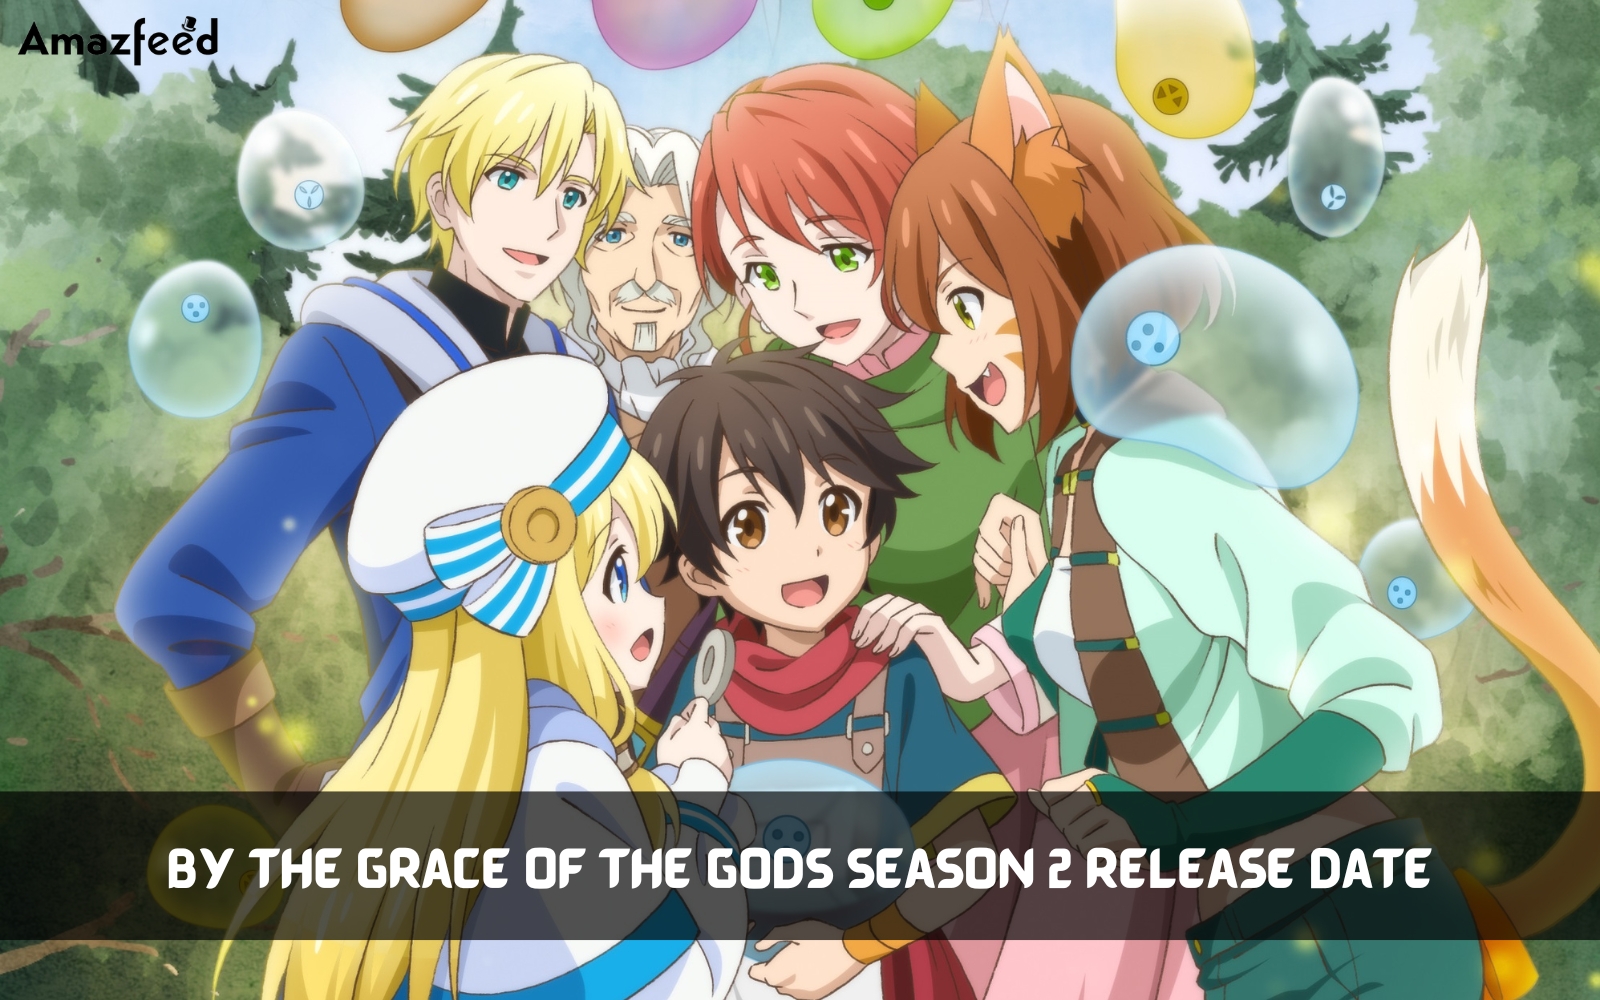 By The Grace Of The Gods Season 2 - What We Know So Far